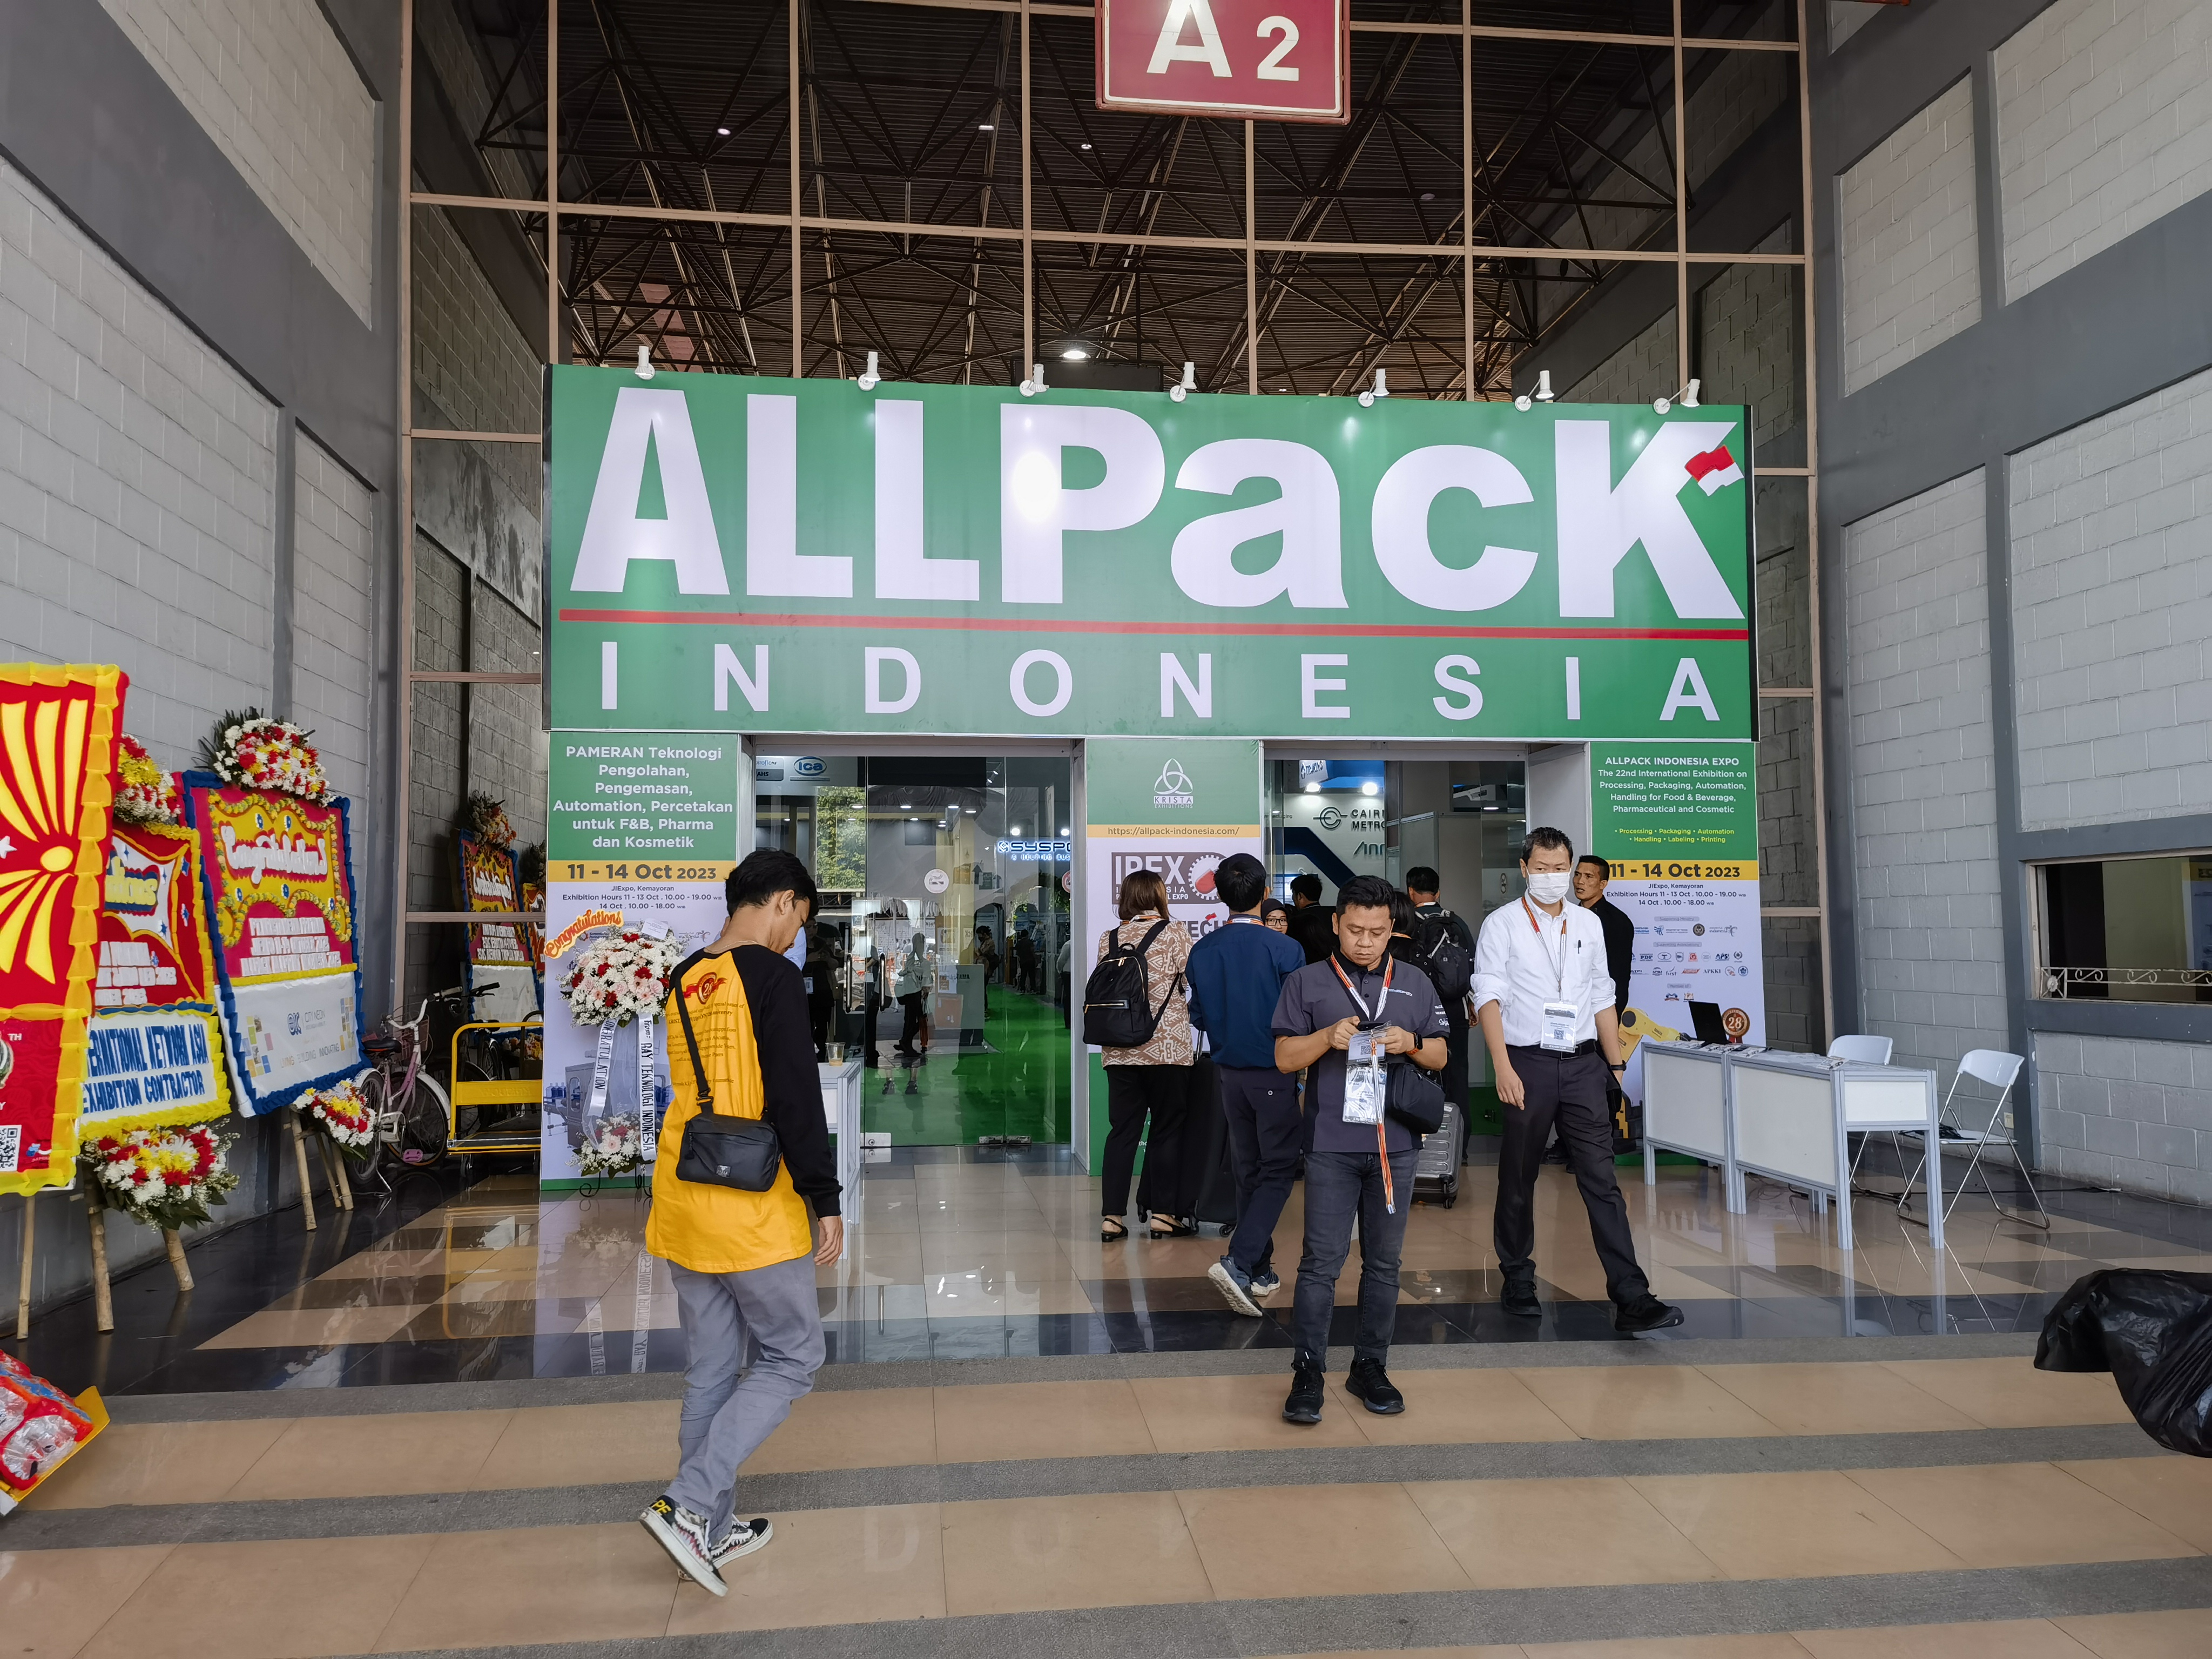 A Heartfelt Thank You to All Our Valued Customers at AllPack Indonesia Exhibition!